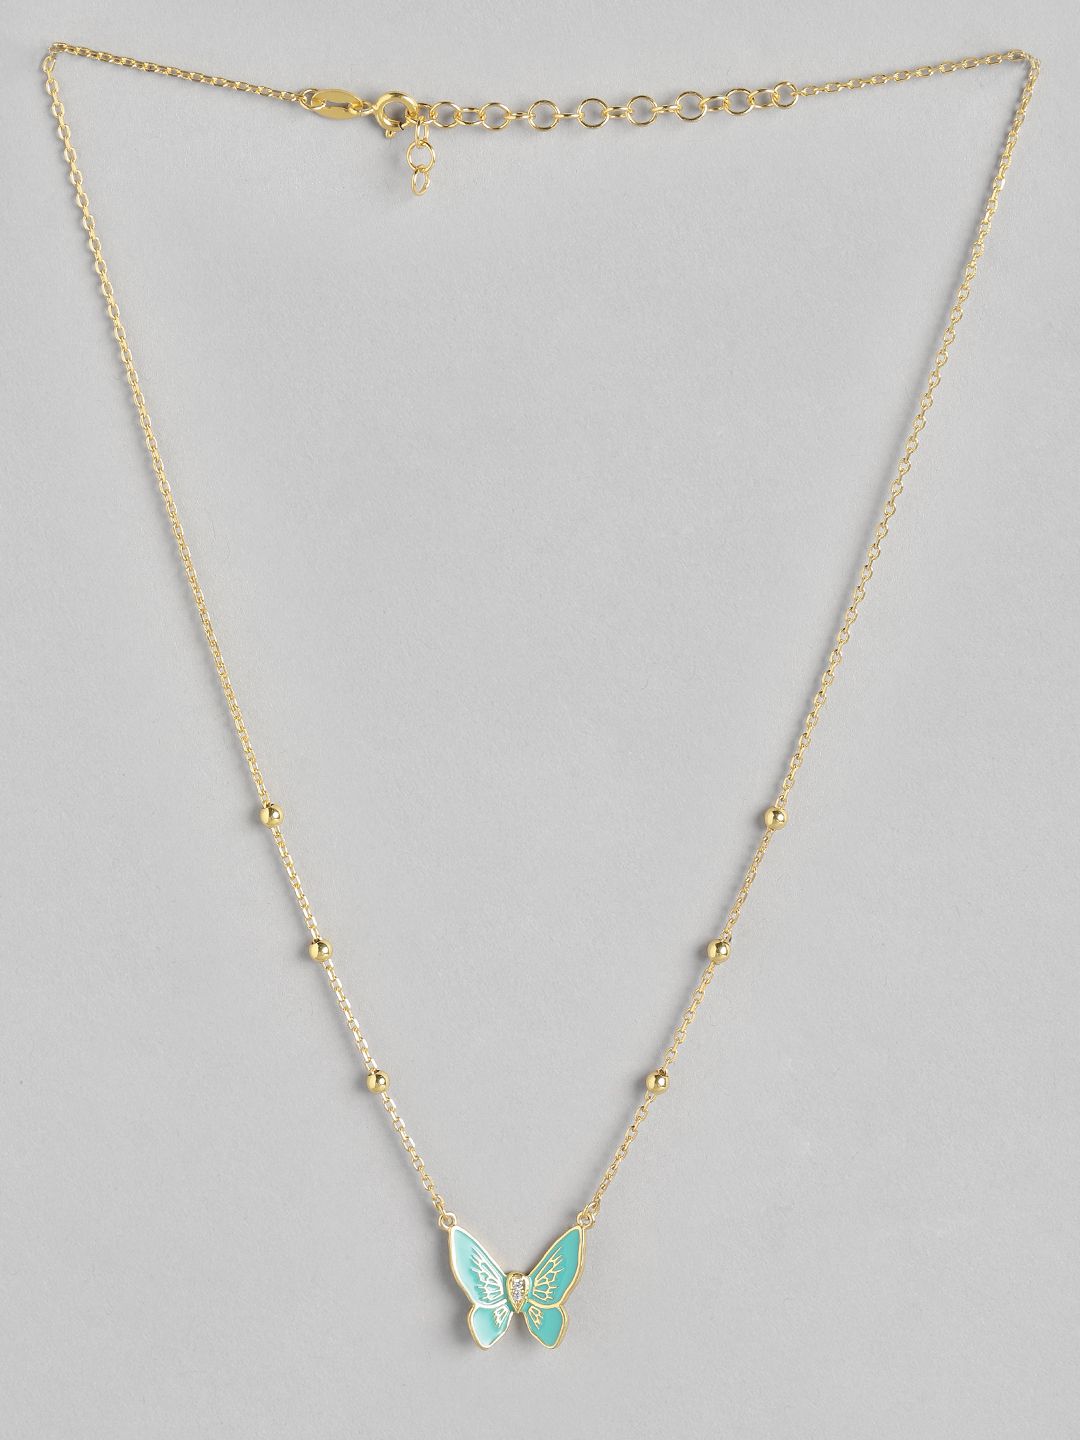 Carlton London Gold-Plated & Turquoise Blue Brass Enamelled Necklace Price in India